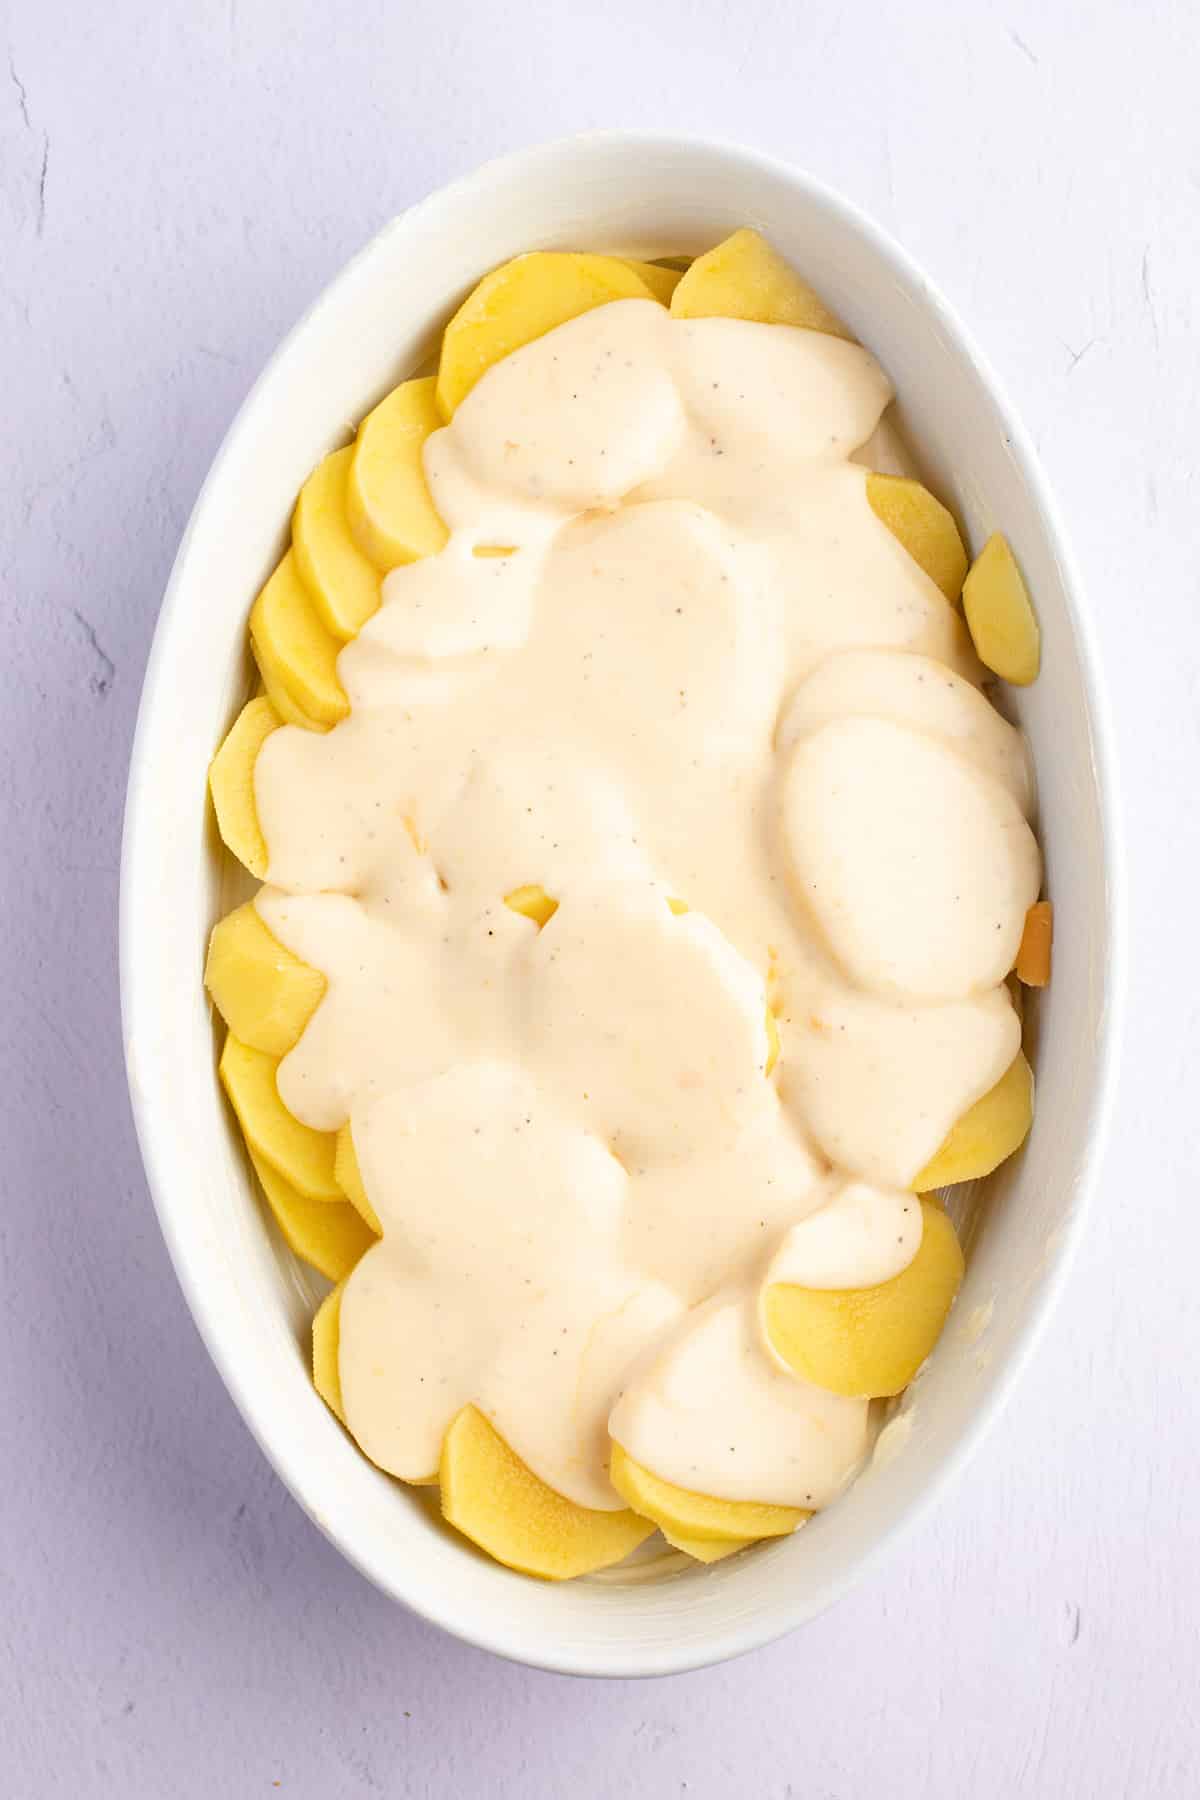 Cream sauce poured over sliced potatoes in a white baking dish.